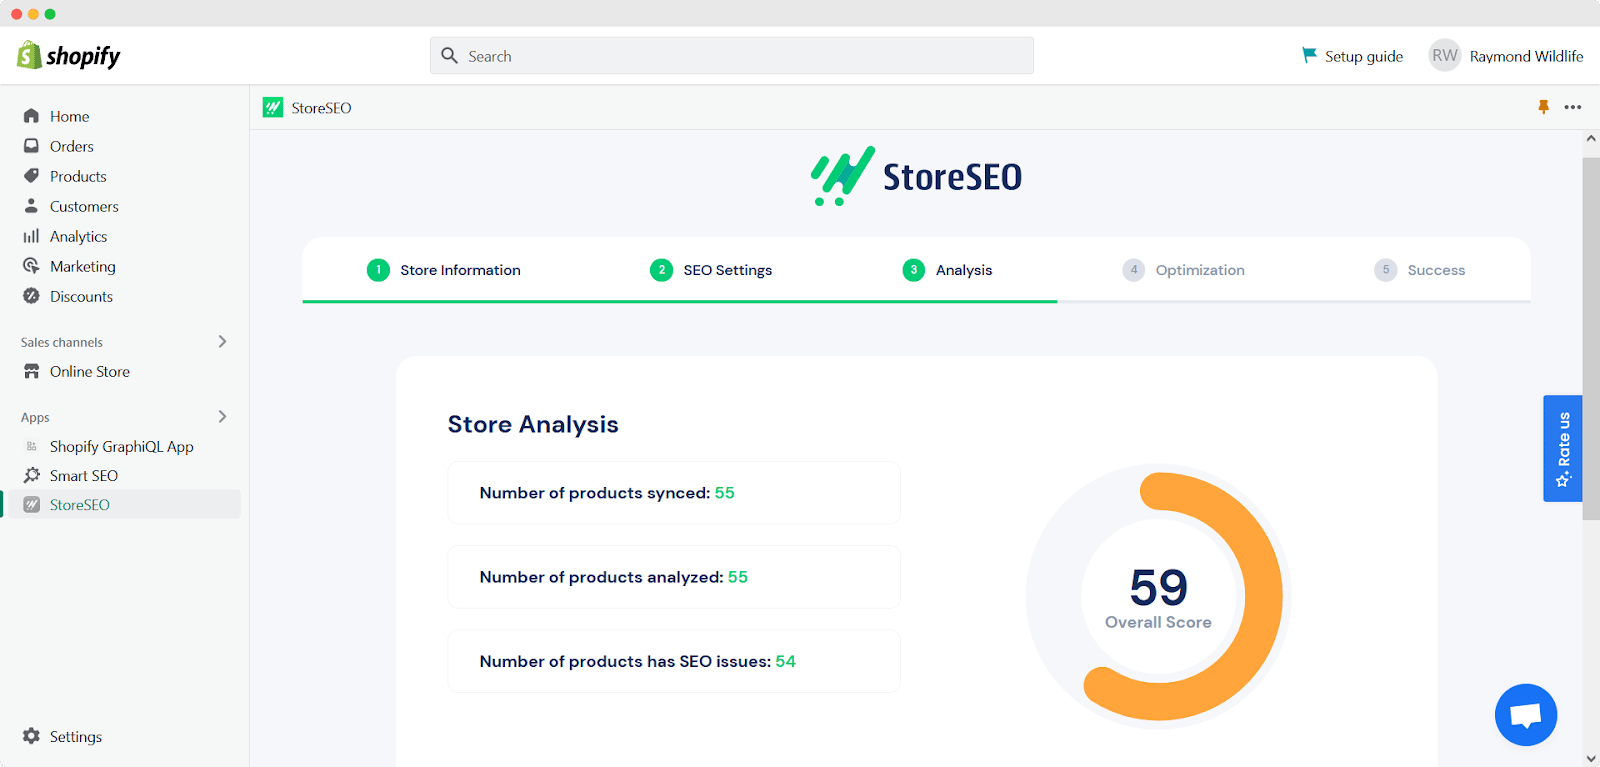 Migrate Data To StoreSEO